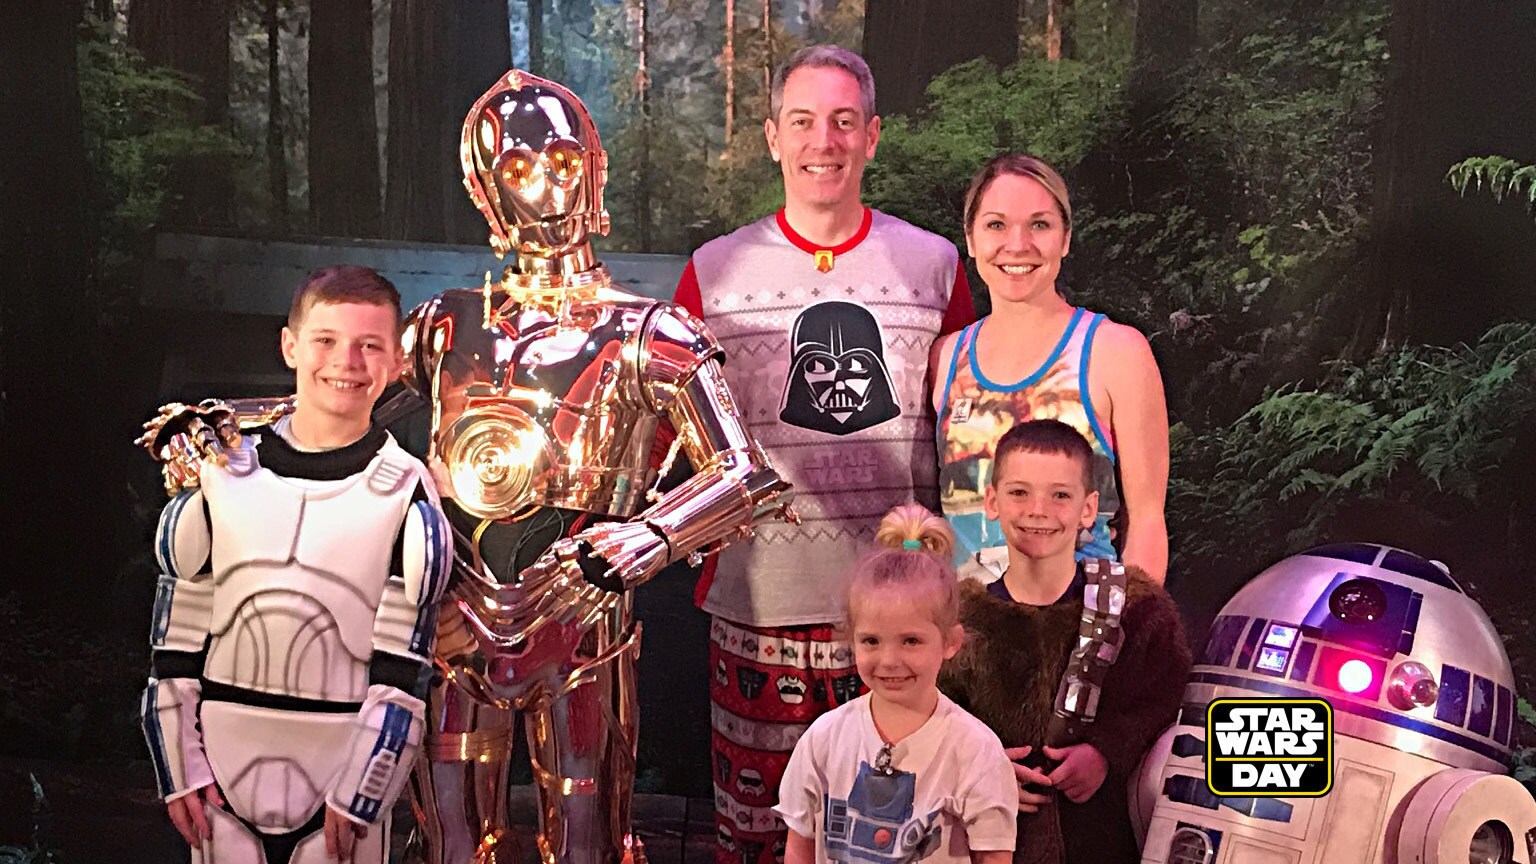 Fans Celebrate the Saga on Star Wars Day at Sea